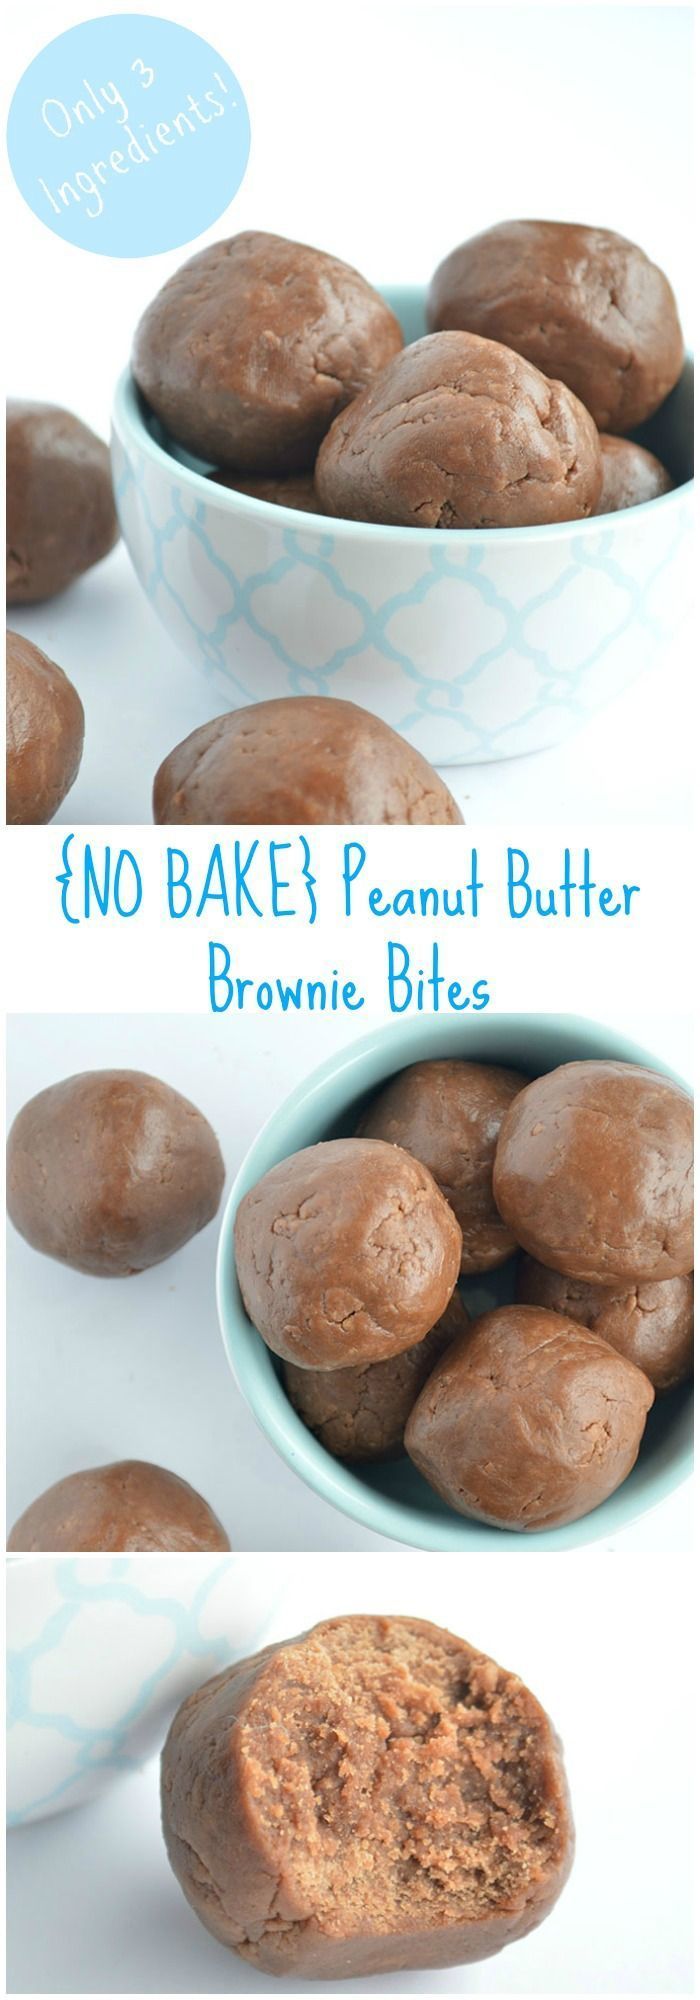 No Bake Peanut Butter Brownie Bites. Perfect combo of PB and chocolate! Only 3 ingredients, and ready in 5